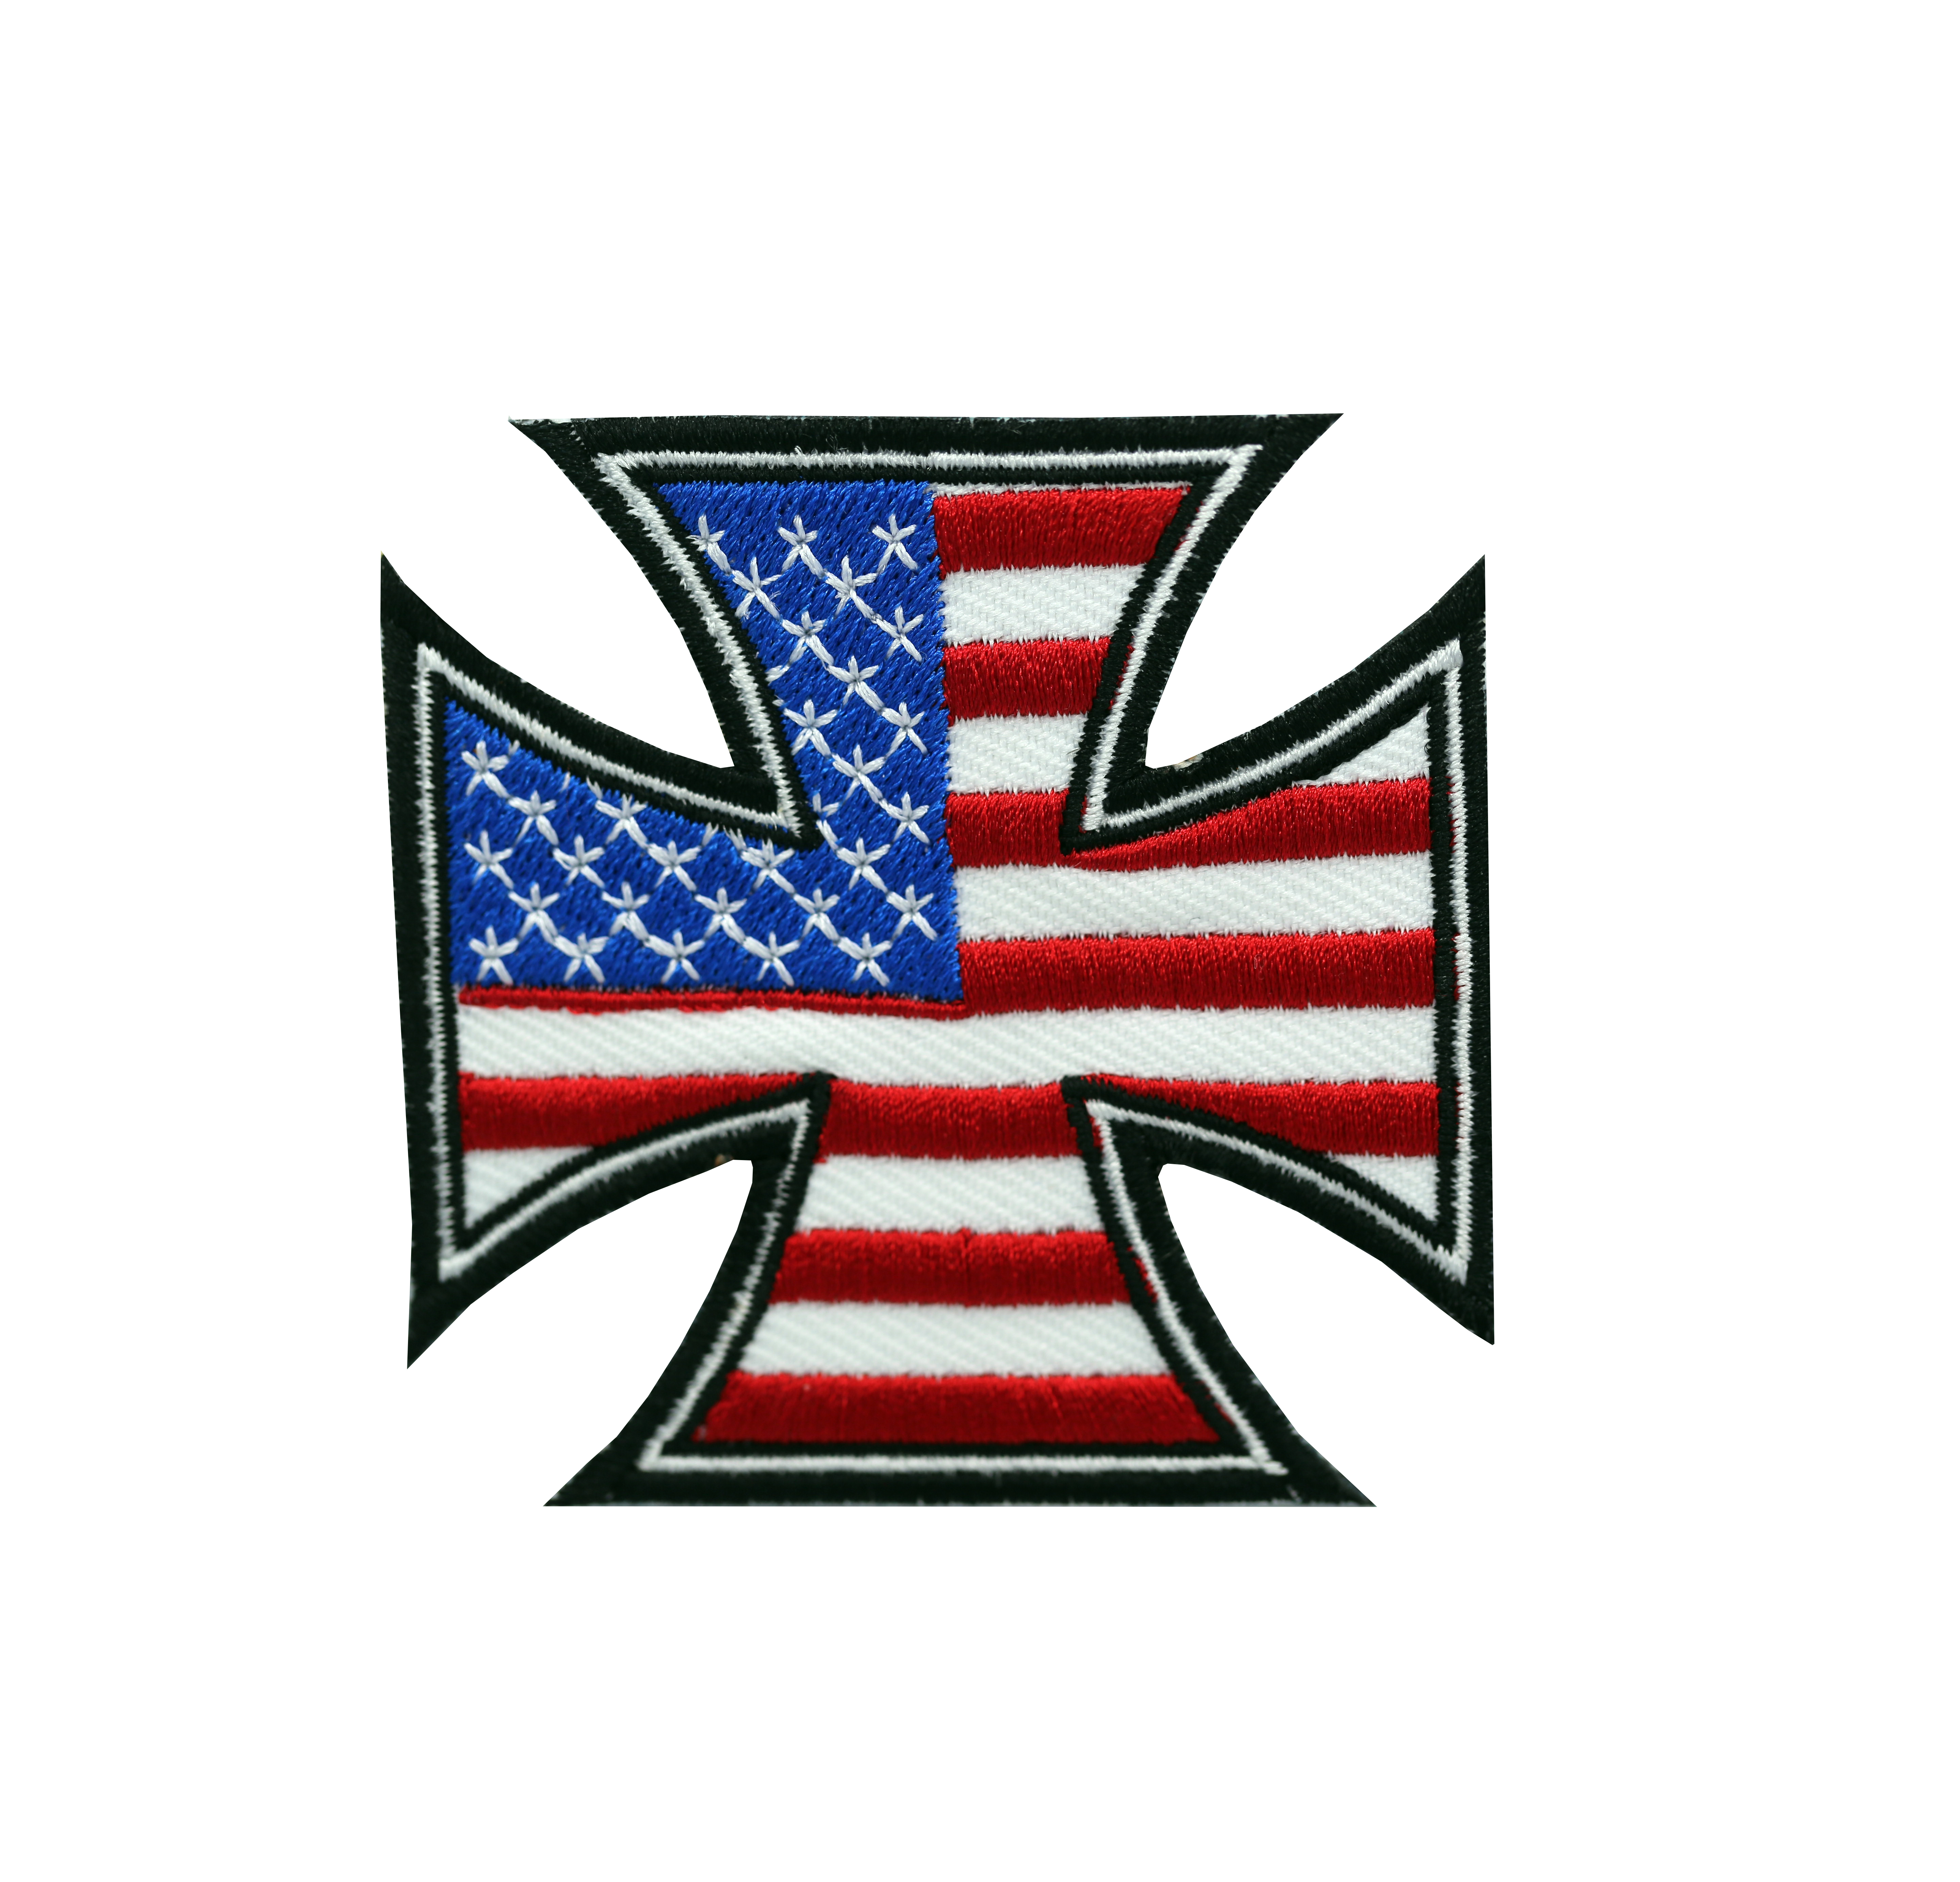 Iron Cross USA Flag embroidery Patch